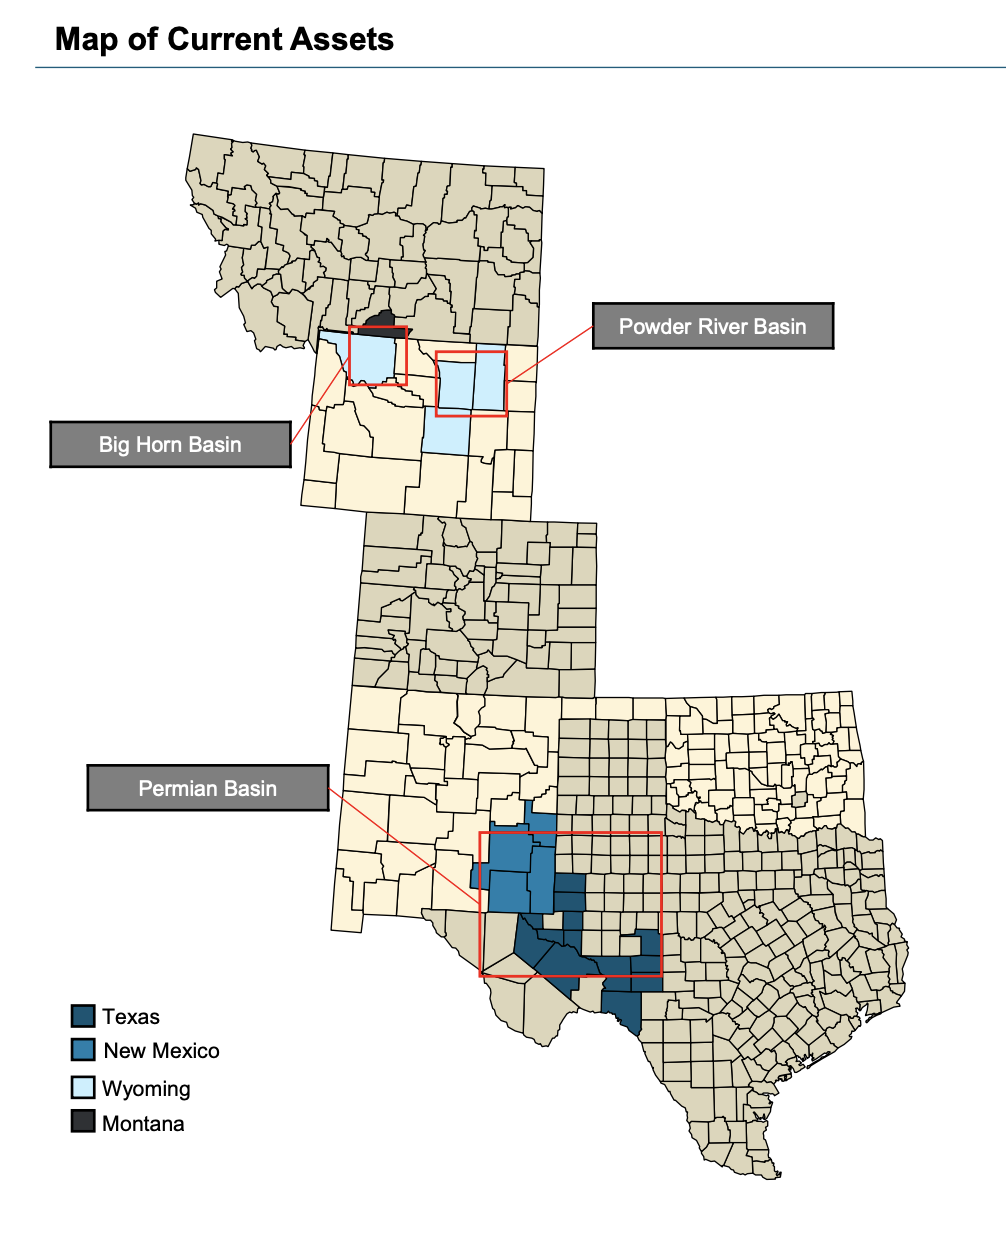 Bank-owned Liquidation Asset Overview Map (Source: Contango Oil & Gas Co.)